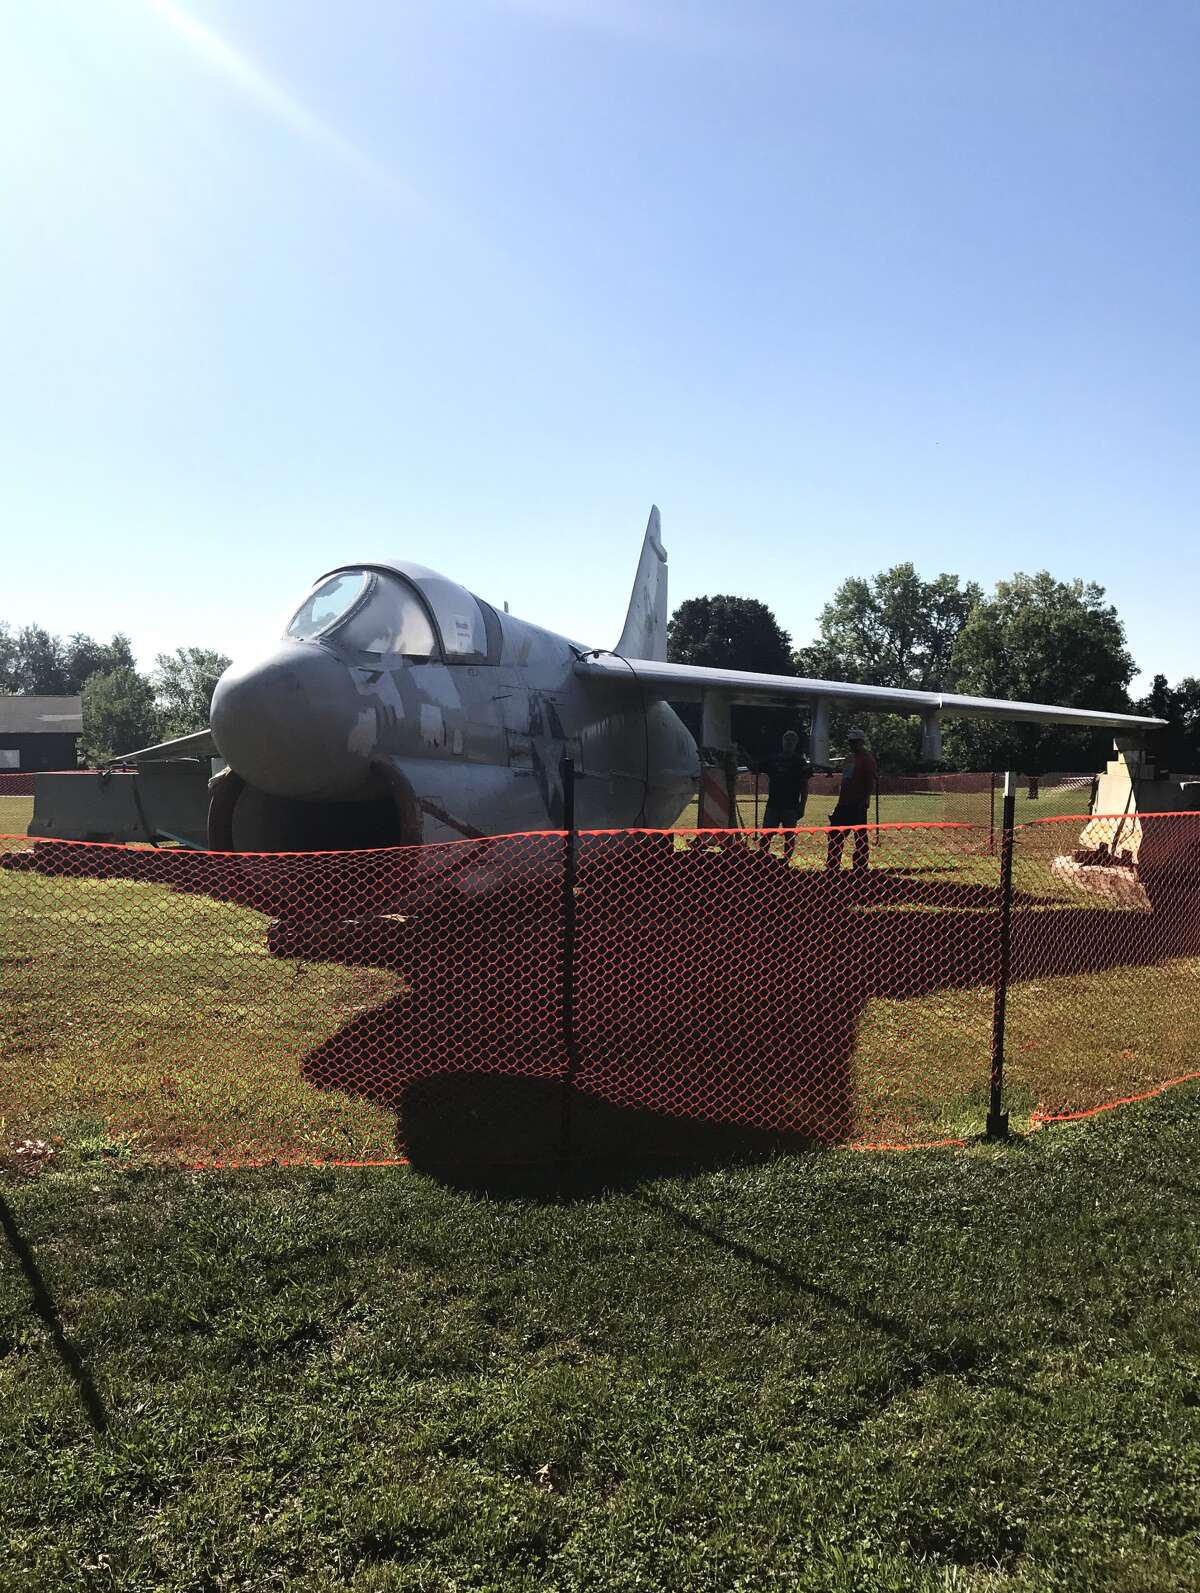 Volunteers contribute to the airplane restoration project at Township Park Saturday morning. The plane restoration officially began in June.